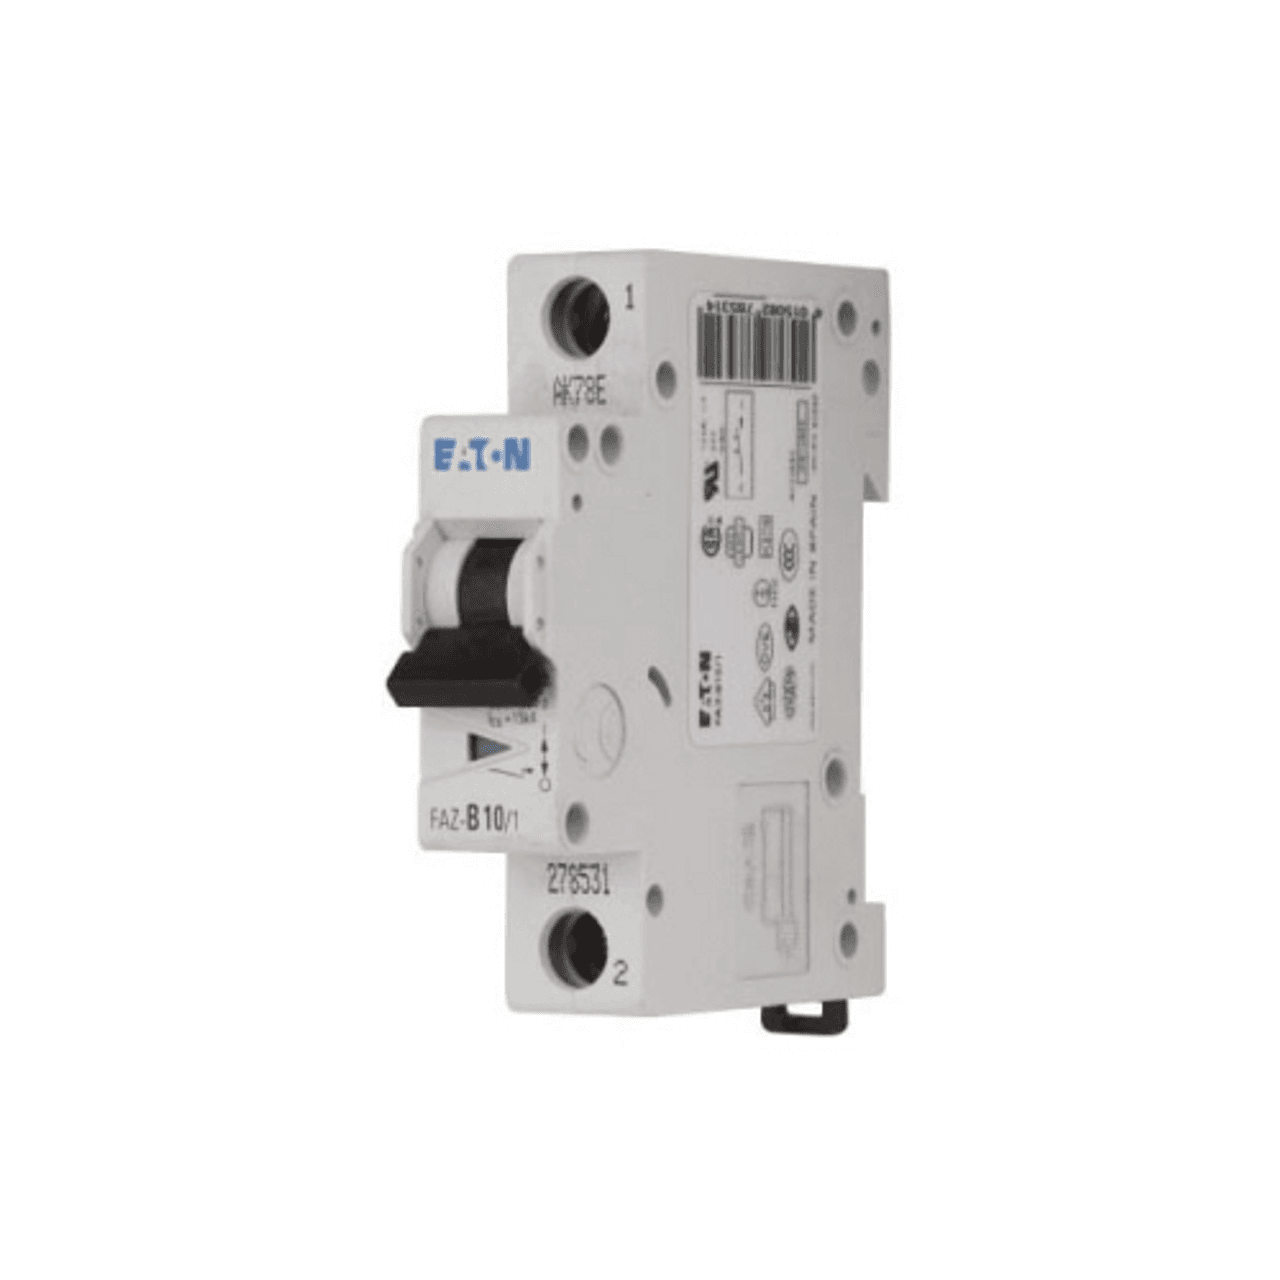 Eaton FAZ-D20/1-NA-SP Eaton FAZ branch protector,UL 489 Industrial miniature circuit breaker - supplementary protector,Single package,High levels of inrush current are expected,20 A,10 kAIC,Single-pole,277 V,10-20X /n,Q38,50-60 Hz,Screw terminals,D Curve